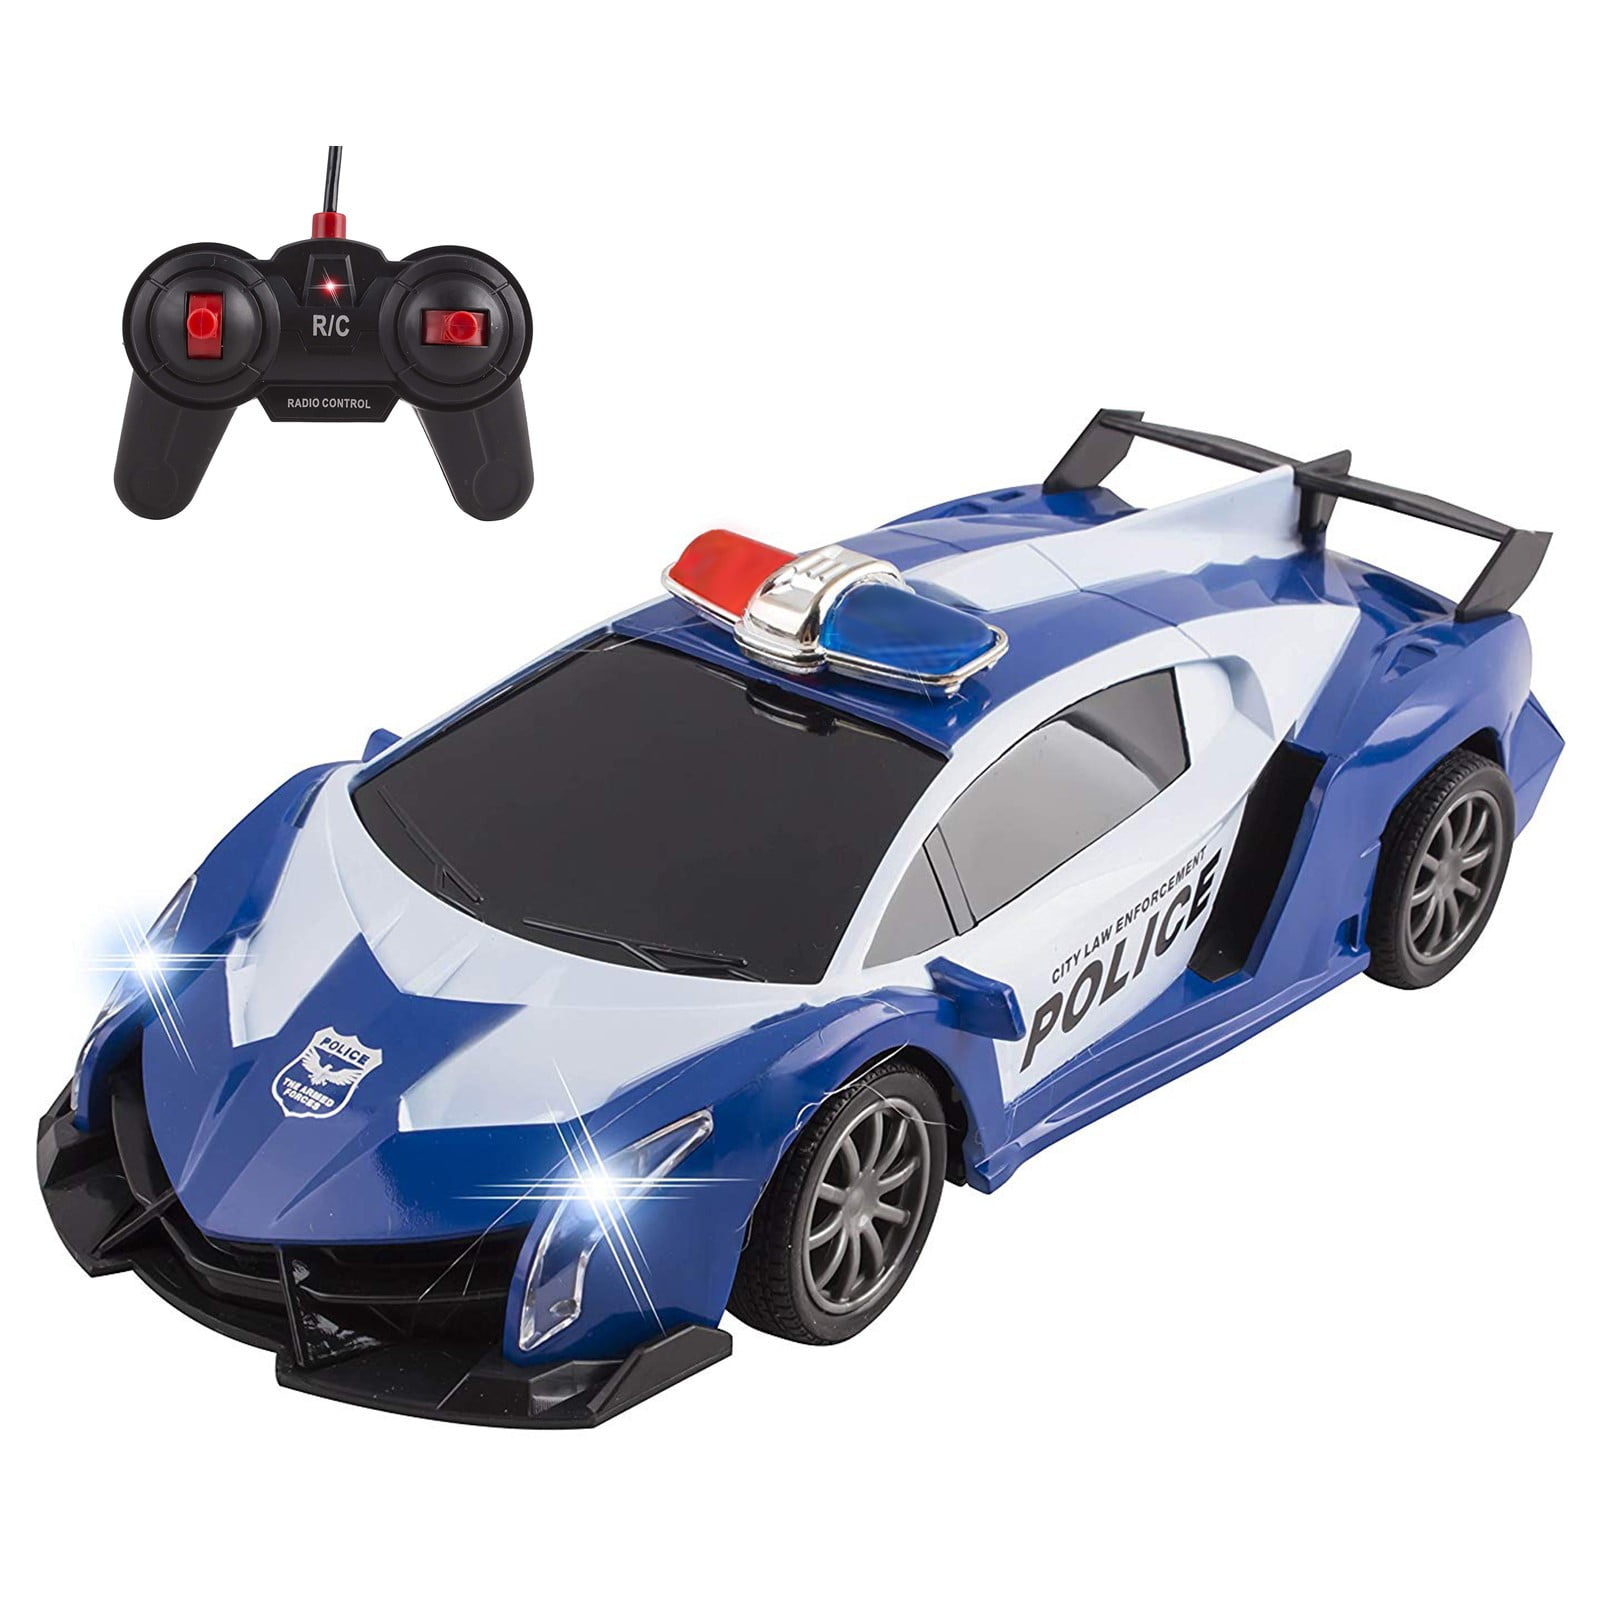 R/C RADIO CONTROL BATTERY OPERATED FULL FUNCTION SPEED RACING 3 CAR TOY 1:20 